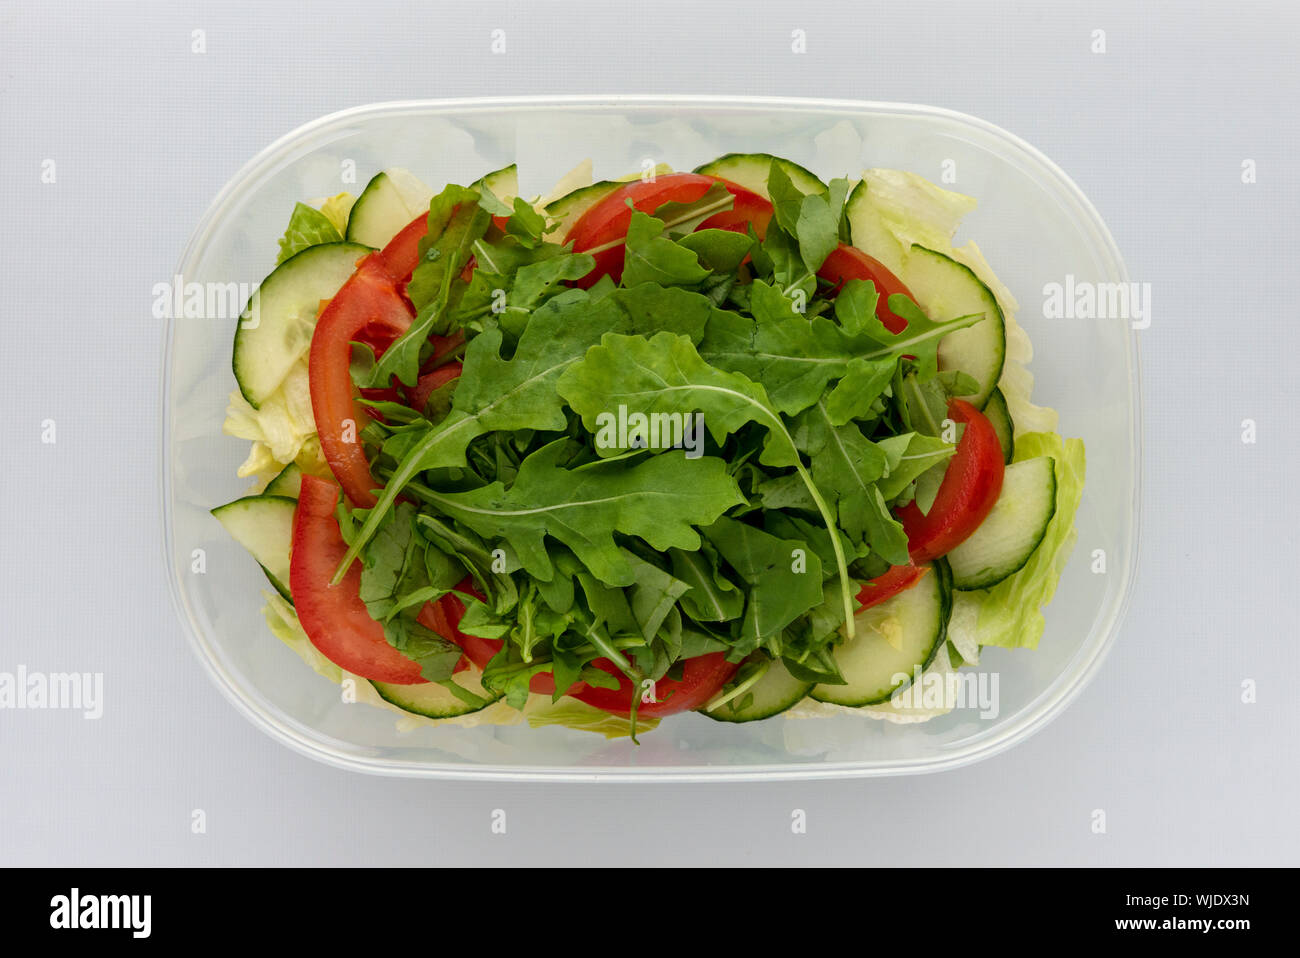 Top view of homemade layered salad in plastic bowl on white surface. Tomatoes cucumber rocket leaves iceberg lettuce from above. Stock Photo